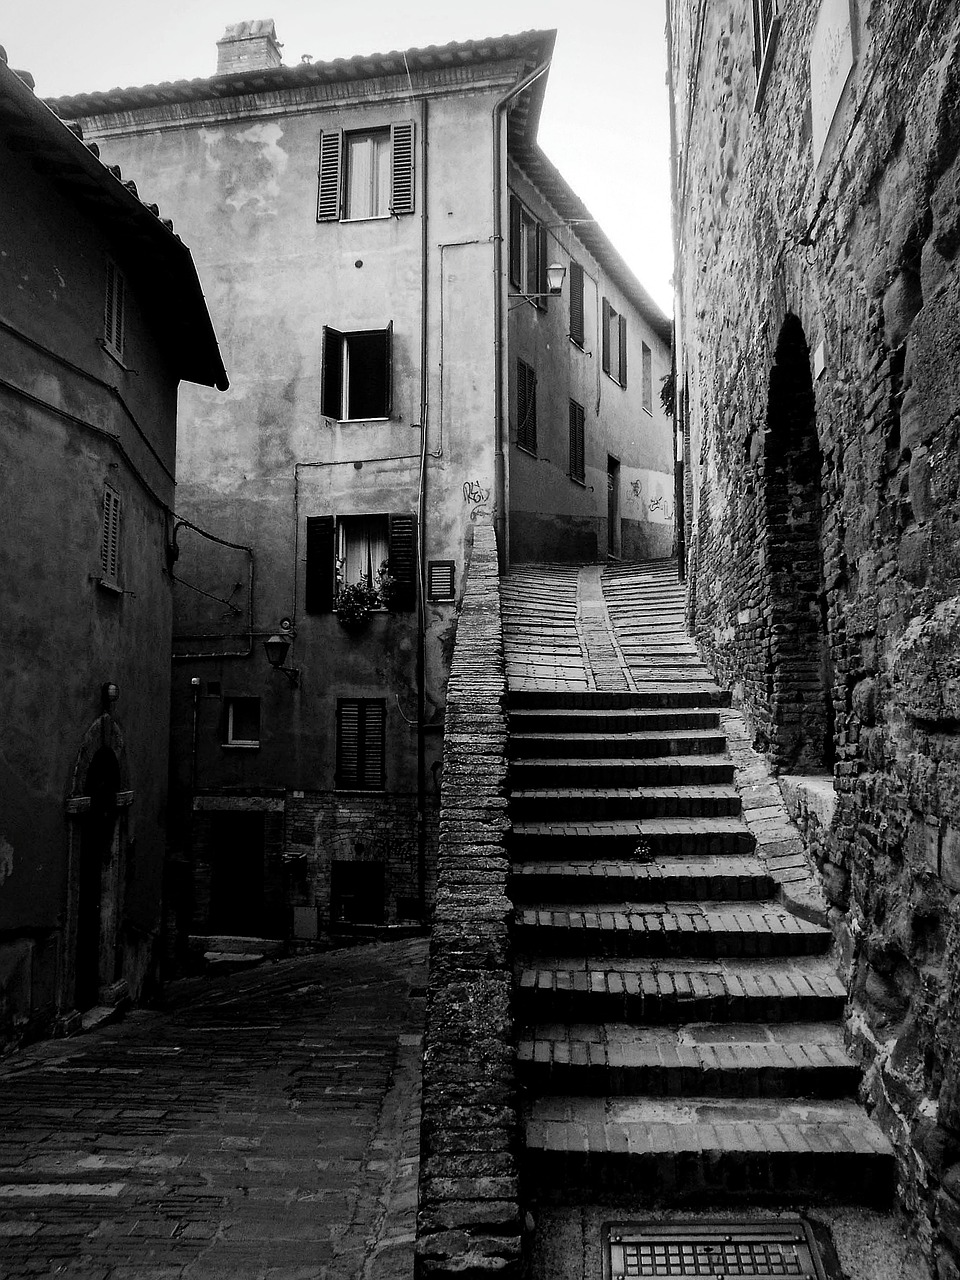 Download free photo of Perugia,umbria,italy,middle ages,city - from ...